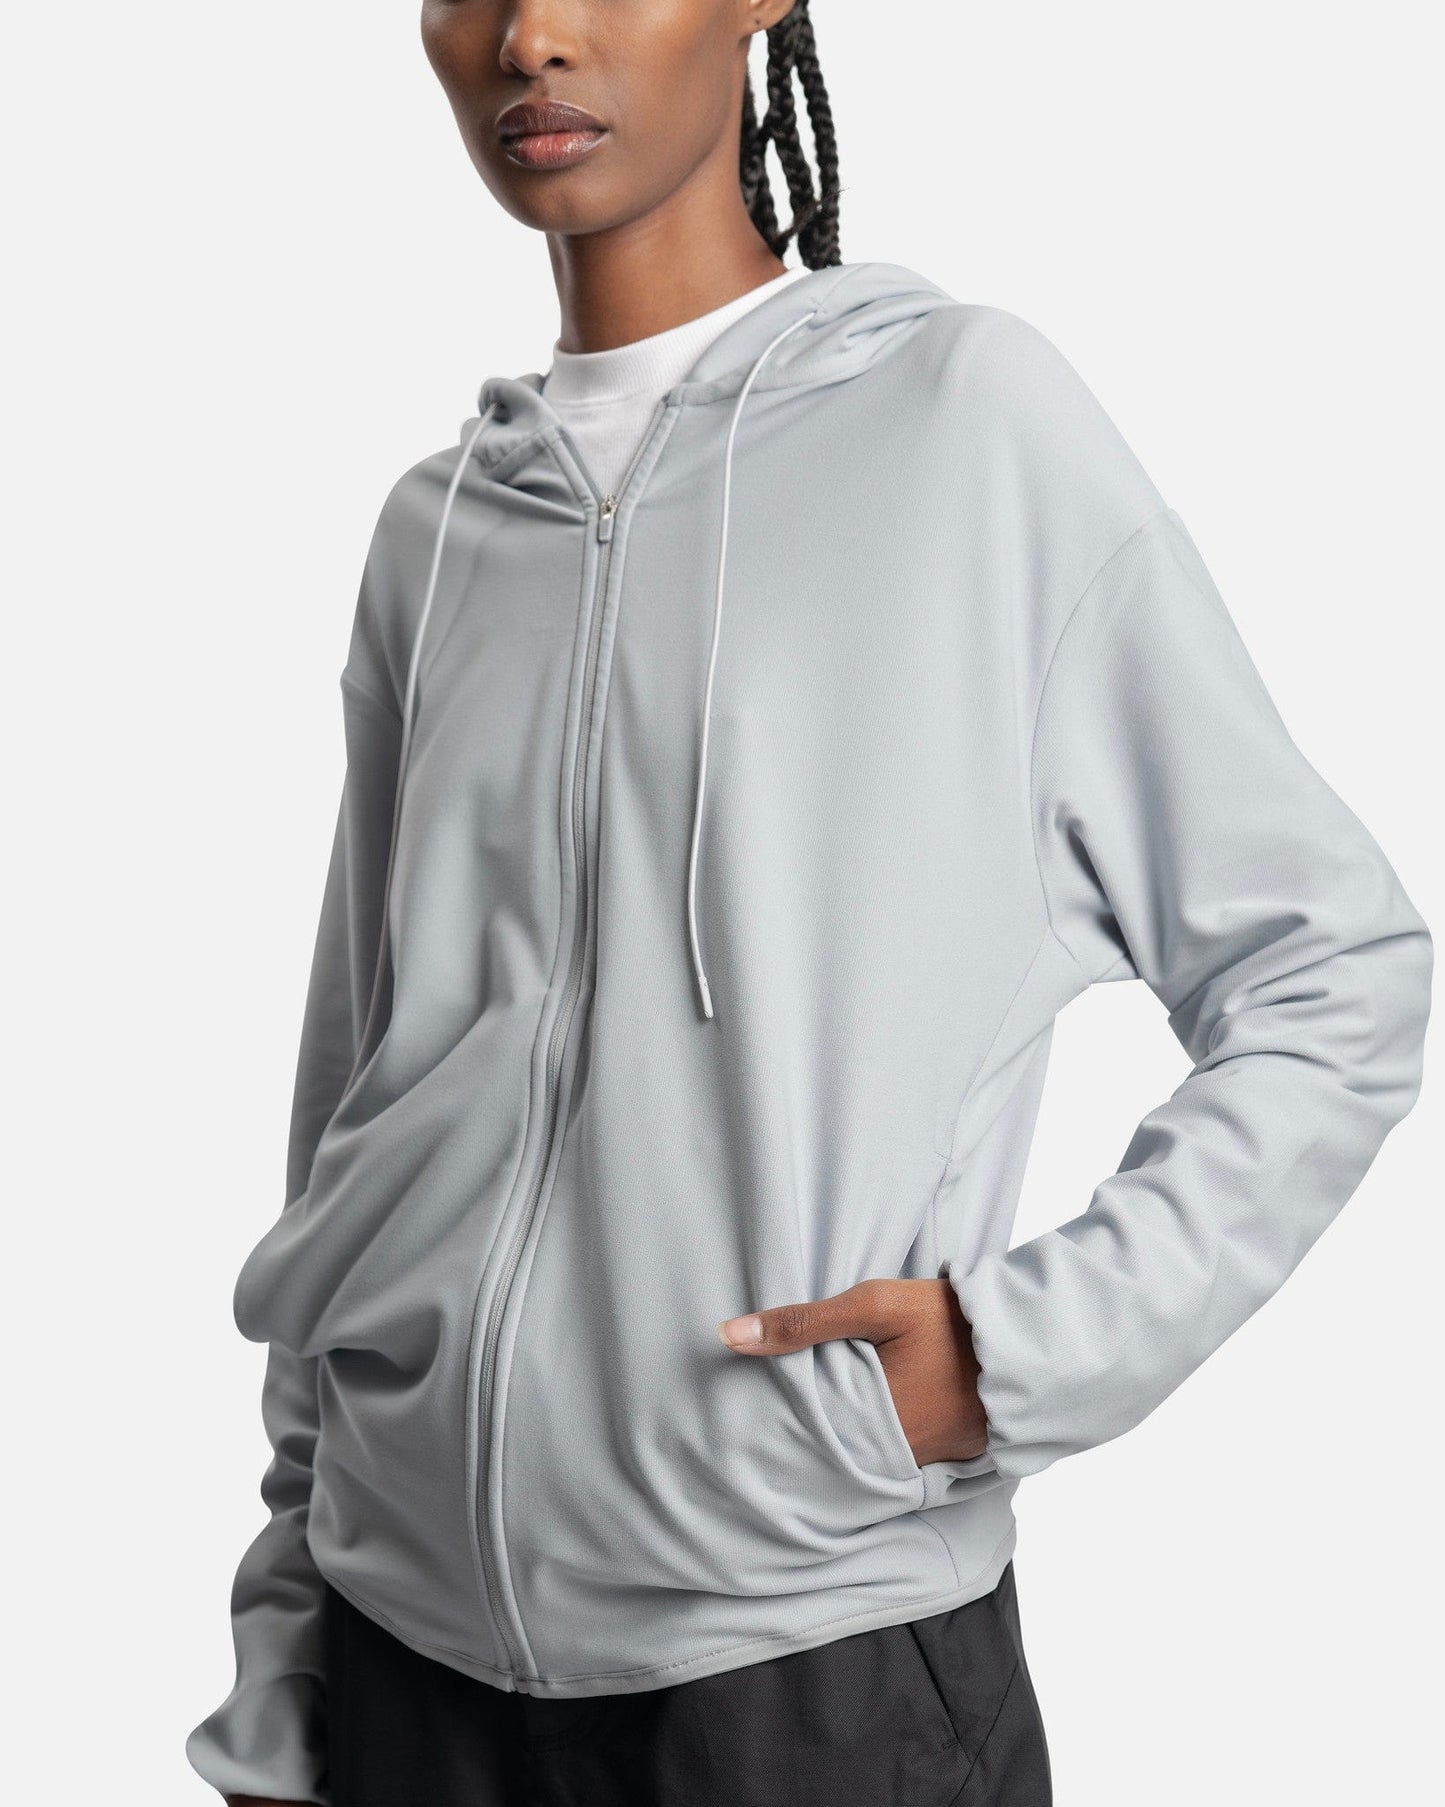 POST ARCHIVE FACTION (P.A.F) Women Tops Women's 5.0 Hoodie Center in Grey